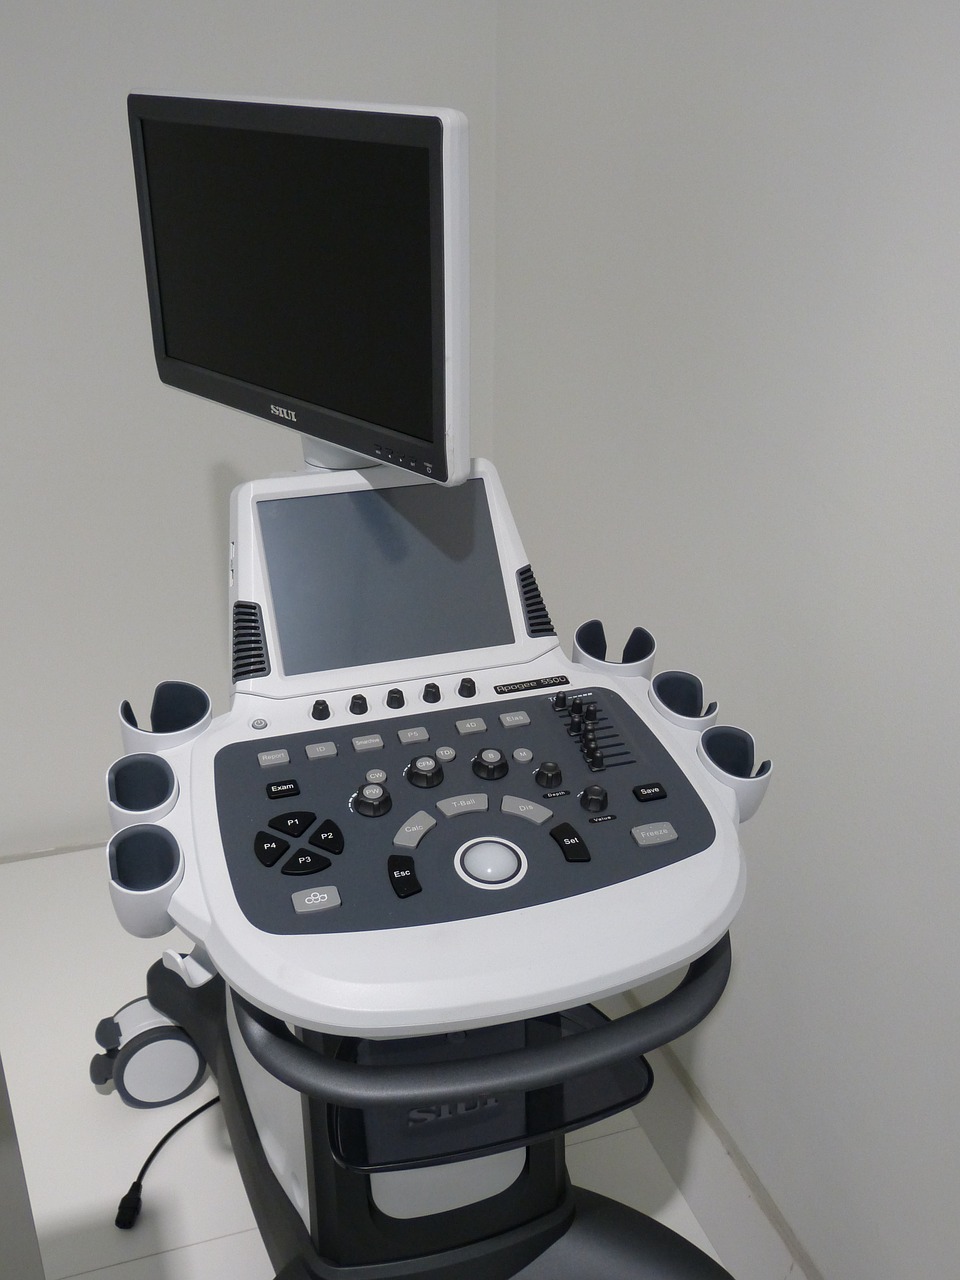 Rating of the best ultrasound machines for 2020